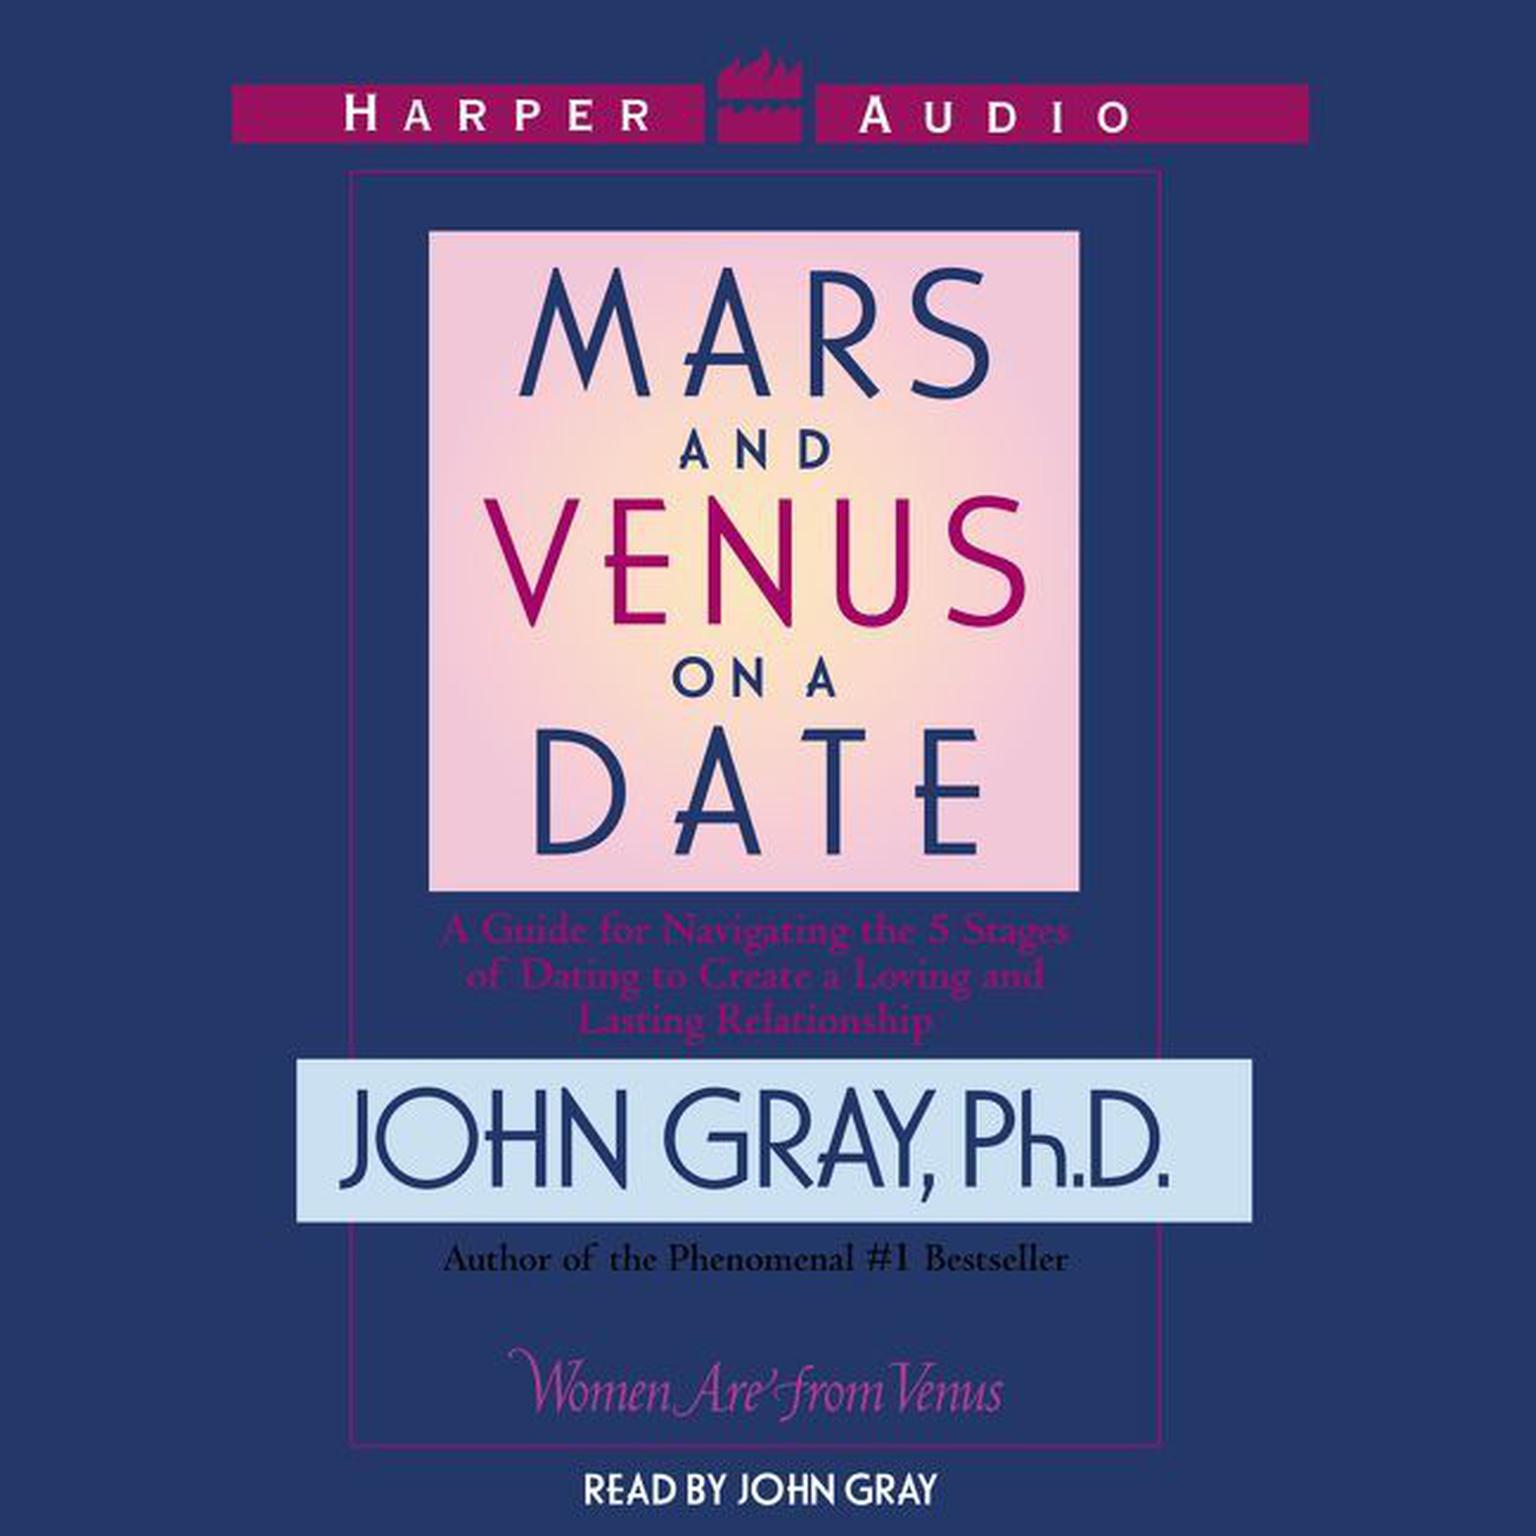 Mars and Venus on a Date (Abridged): A Guide for Navigating the 5 Stages of Dating to Create a Loving and Lasting Relationship Audiobook, by John Gray